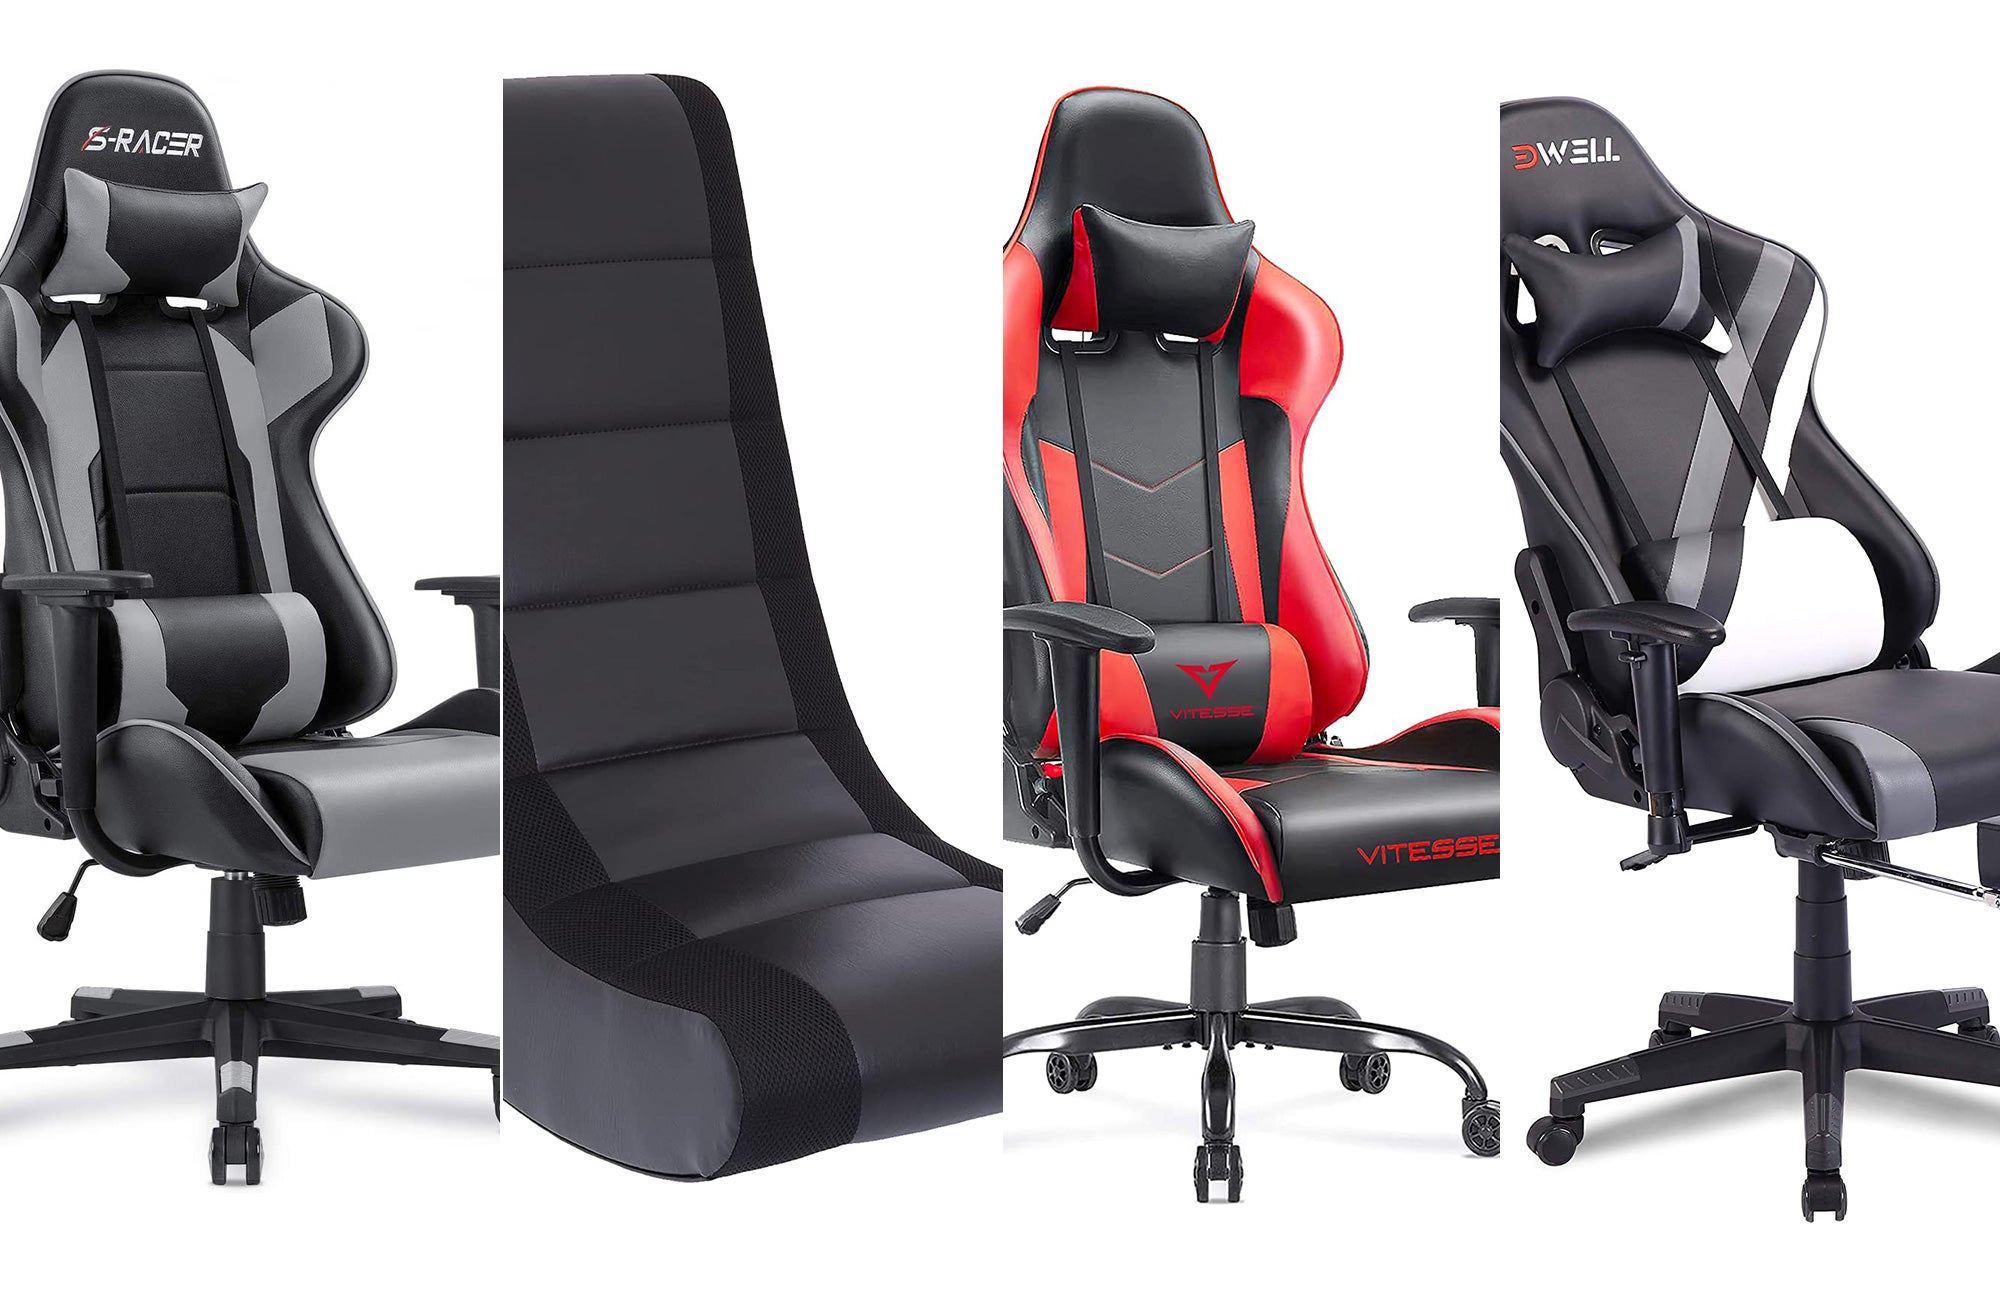 Best gaming chairs under $100 in 2022